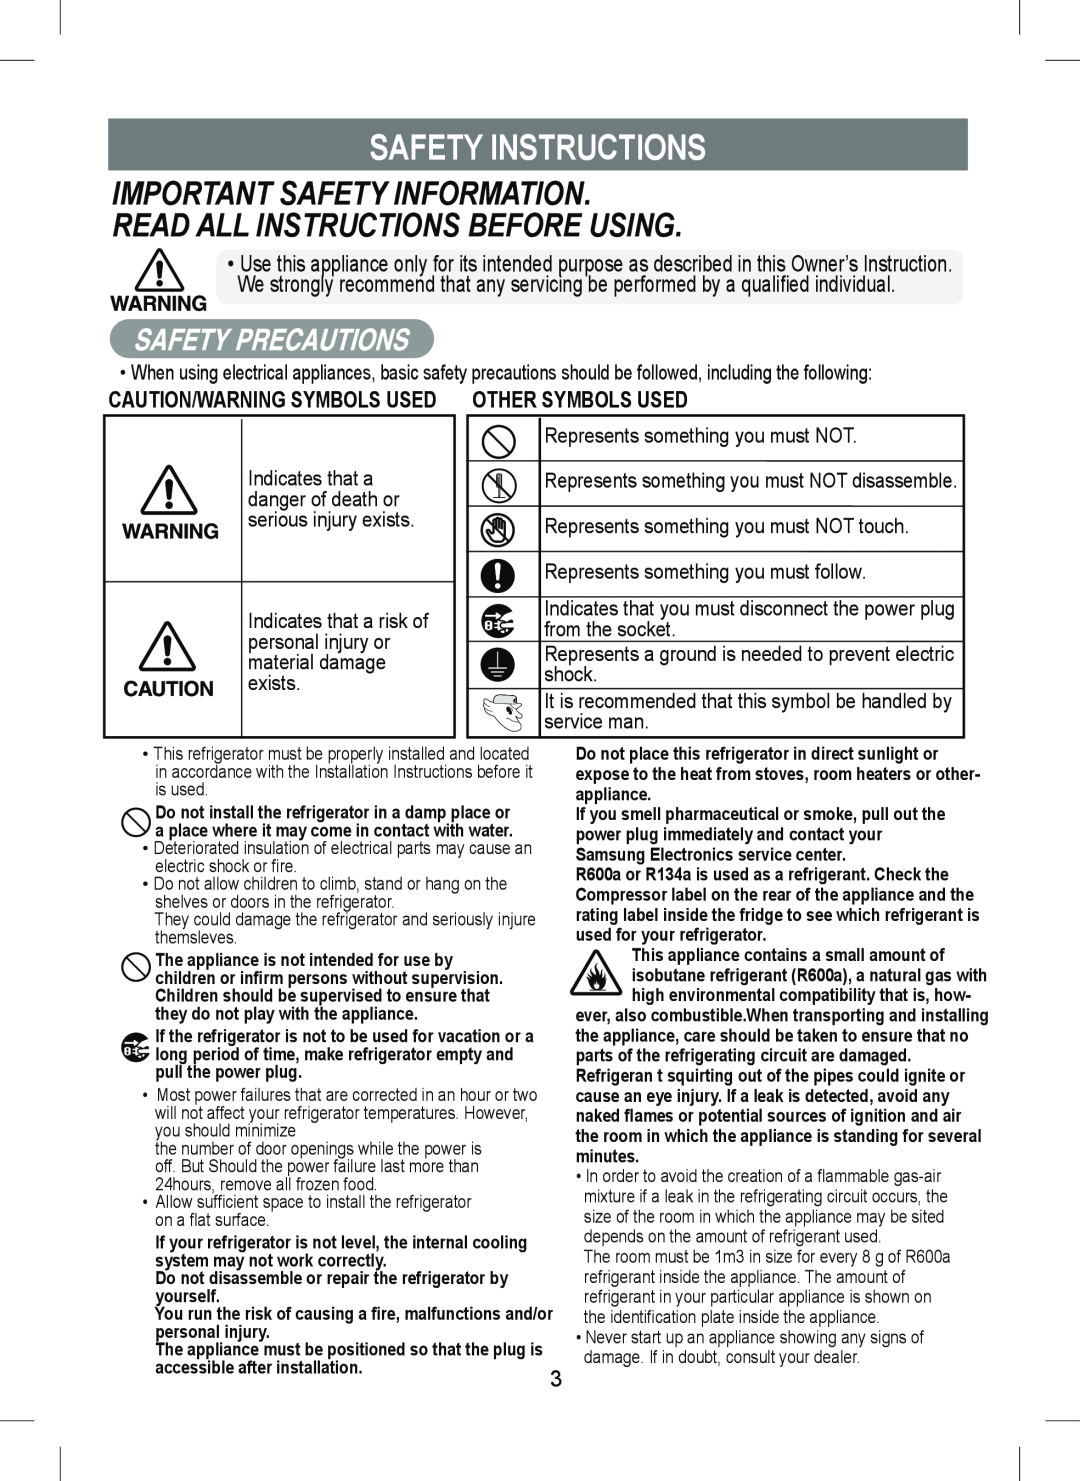 Samsung RT41M, RT45M, RT41E manual Safety Instructions, Important Safety Information Read All Instructions Before Using 